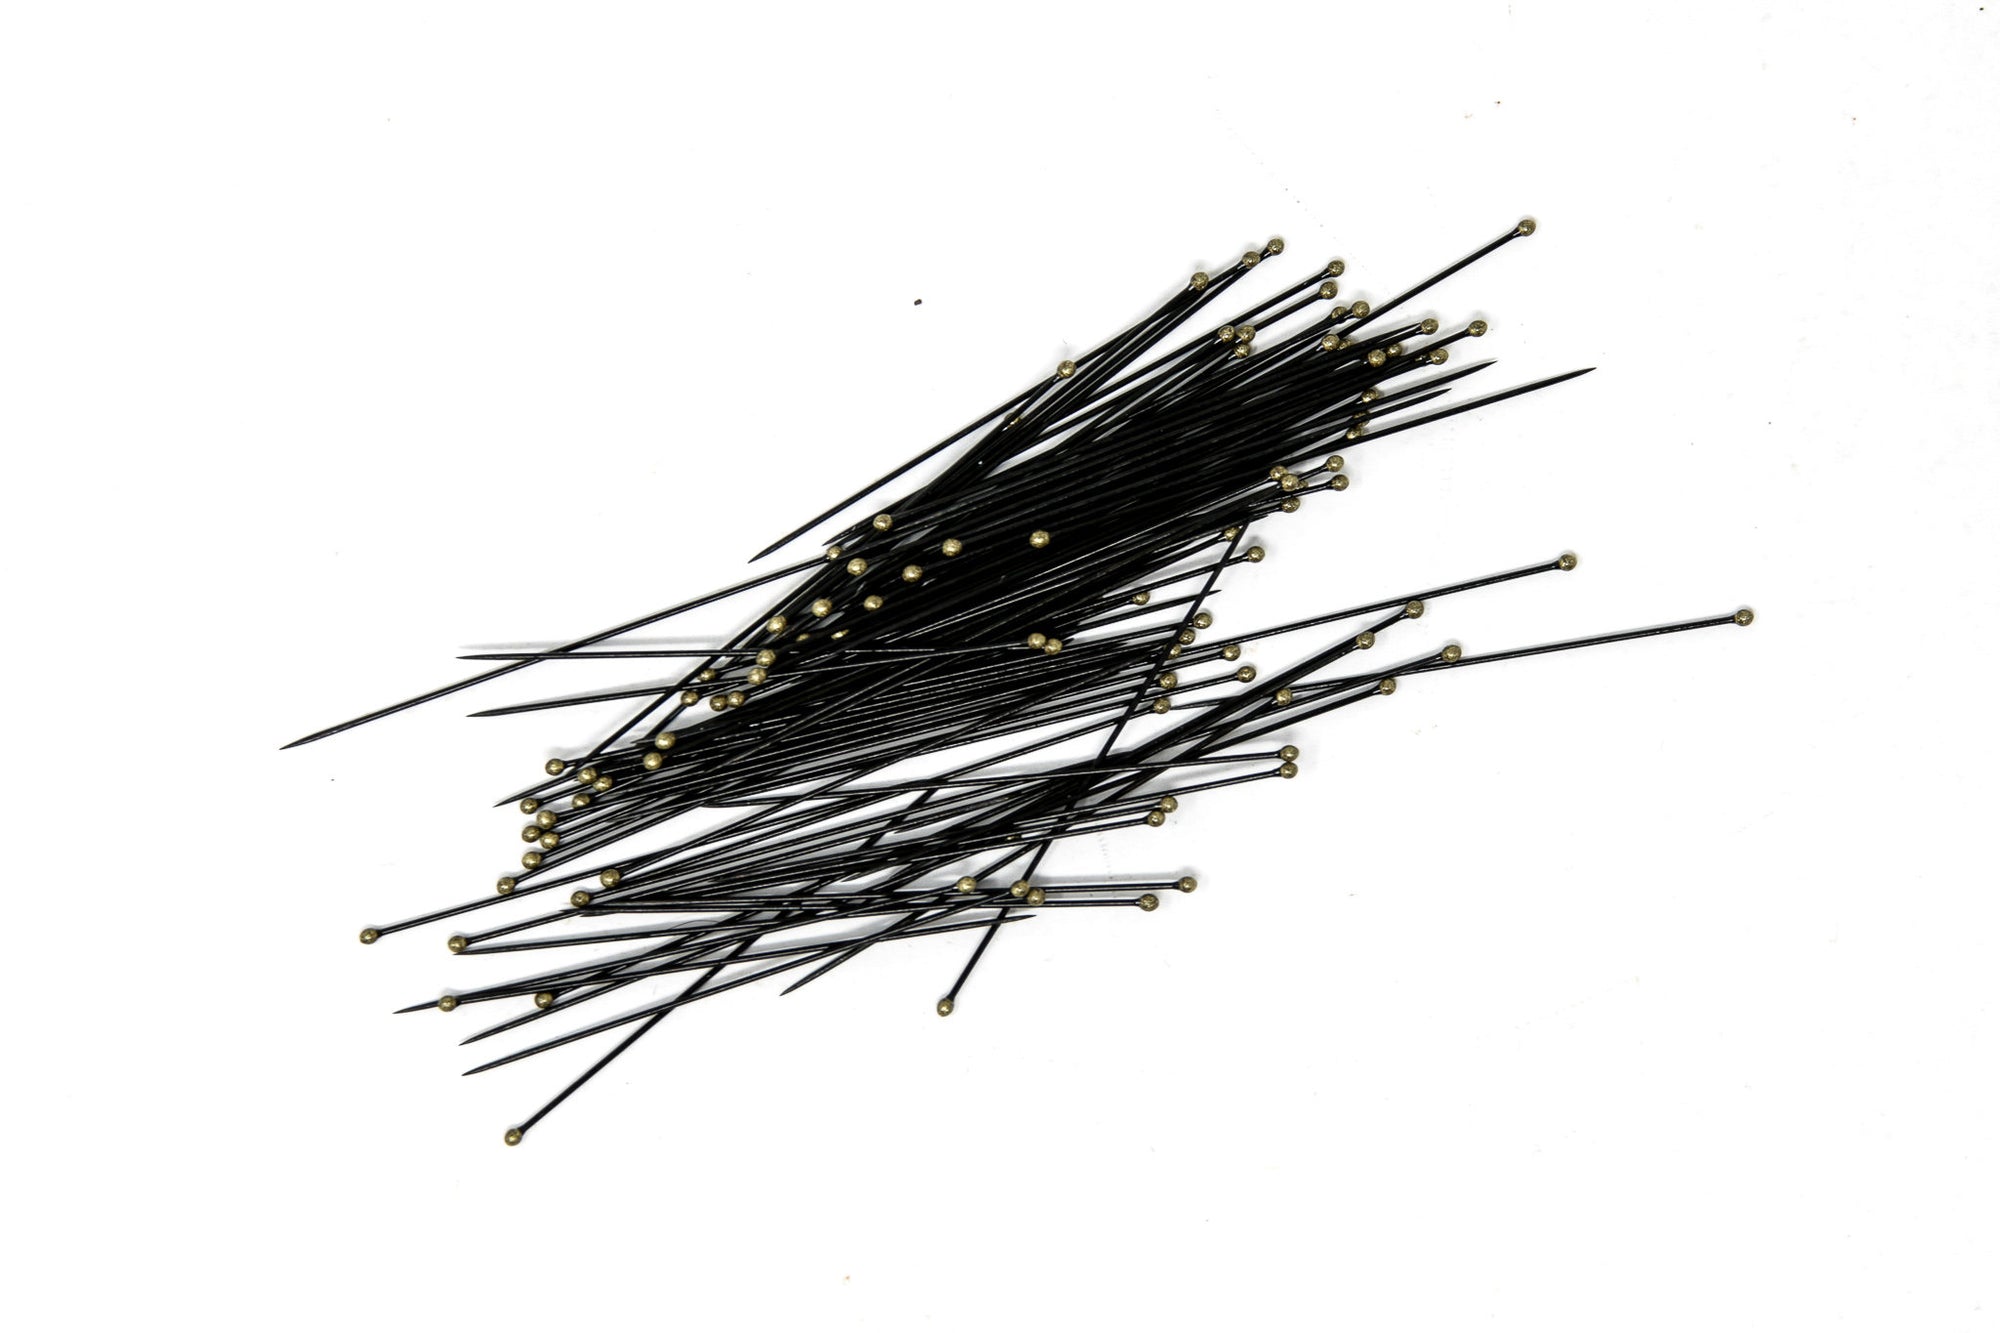 Insect Entomology Pins | 100 Per Pack for Setting Butterflies and Insect Specimens | Continental Black Nylon Head Pins No.2